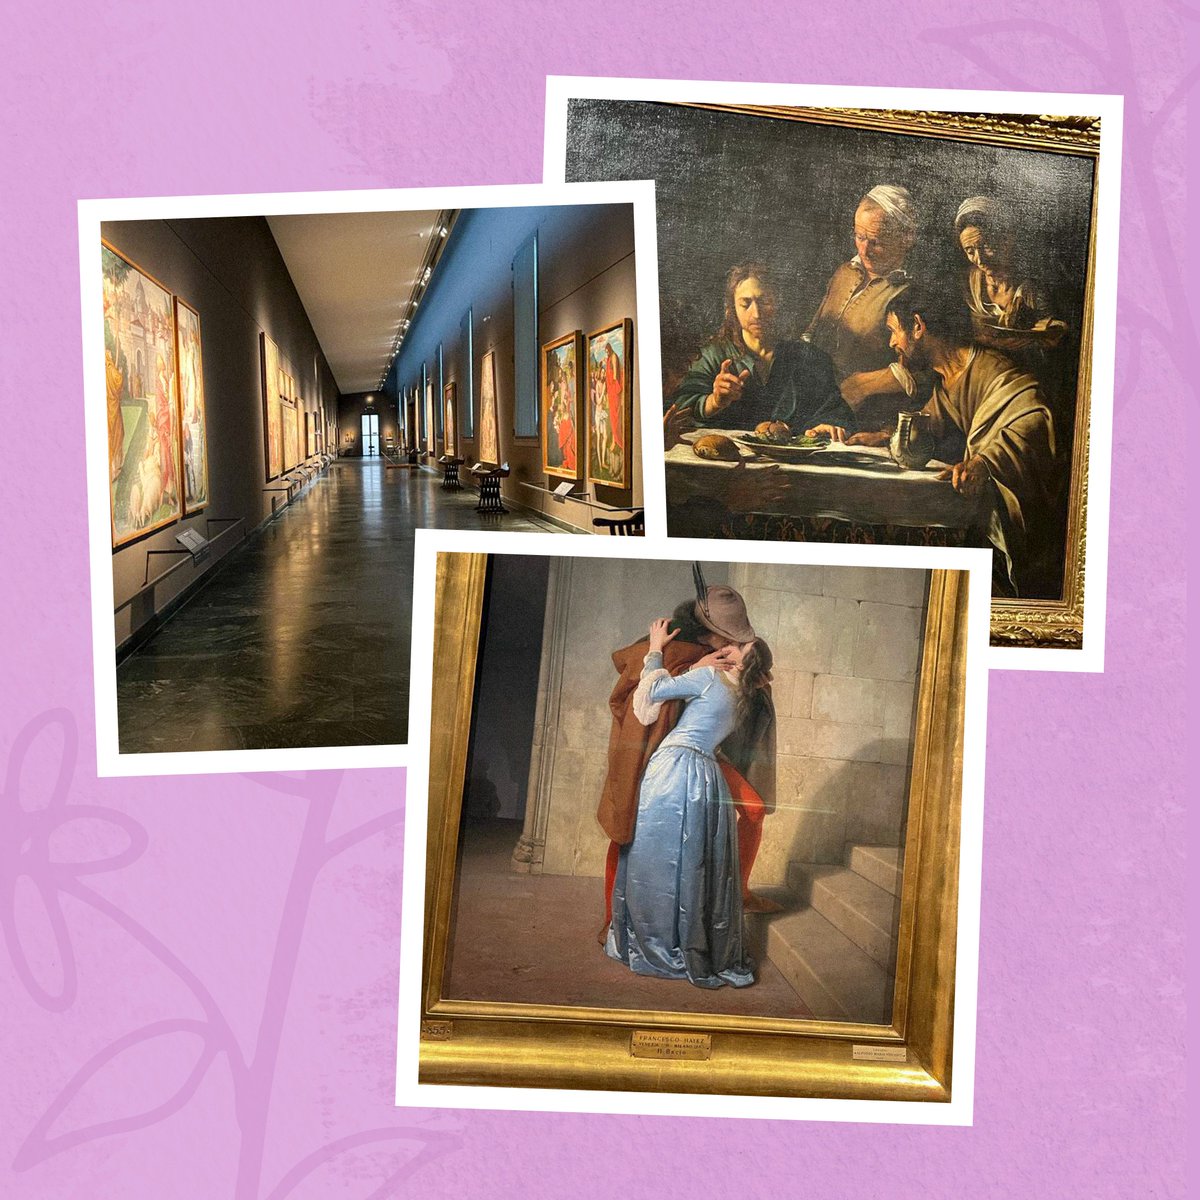 Art is a glimpse into the boundless beauty of human imagination. Here are some snaps I took from the Brera Museum in Milan, directed by my friend James Bradburne when I visited! 

#worldartday #CreativeExpressions #museum #art #passion